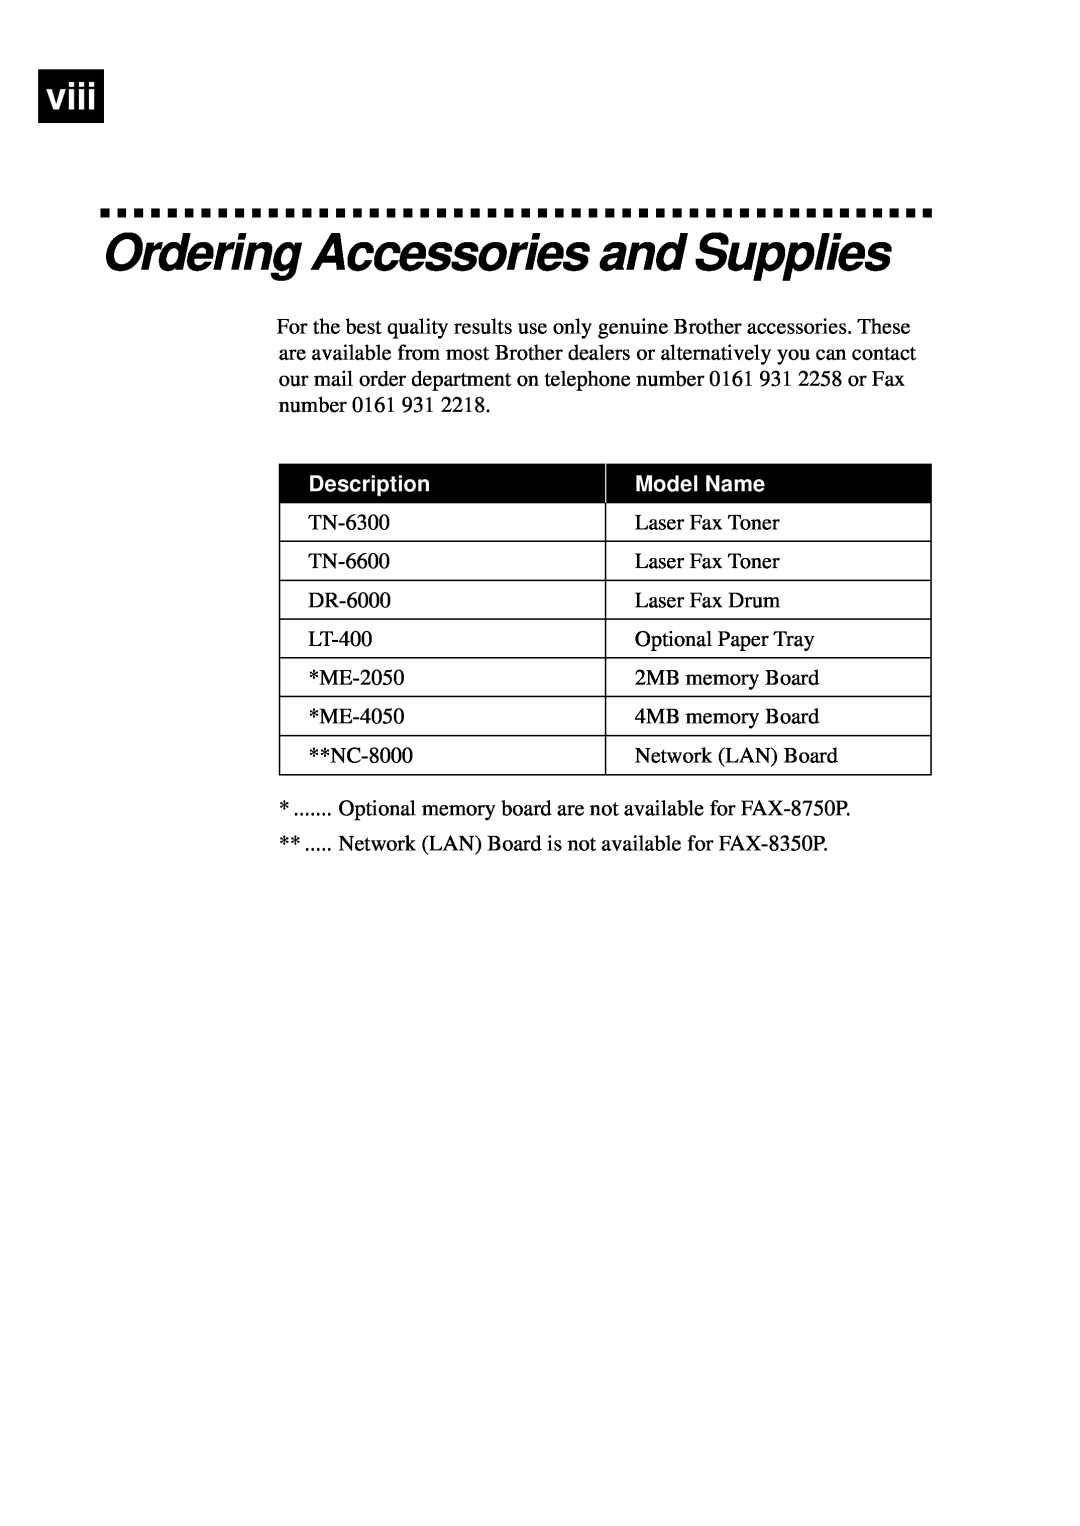 Brother FAX-8350P, MFC-9650 owner manual Ordering Accessories and Supplies, viii, Description, Model Name 